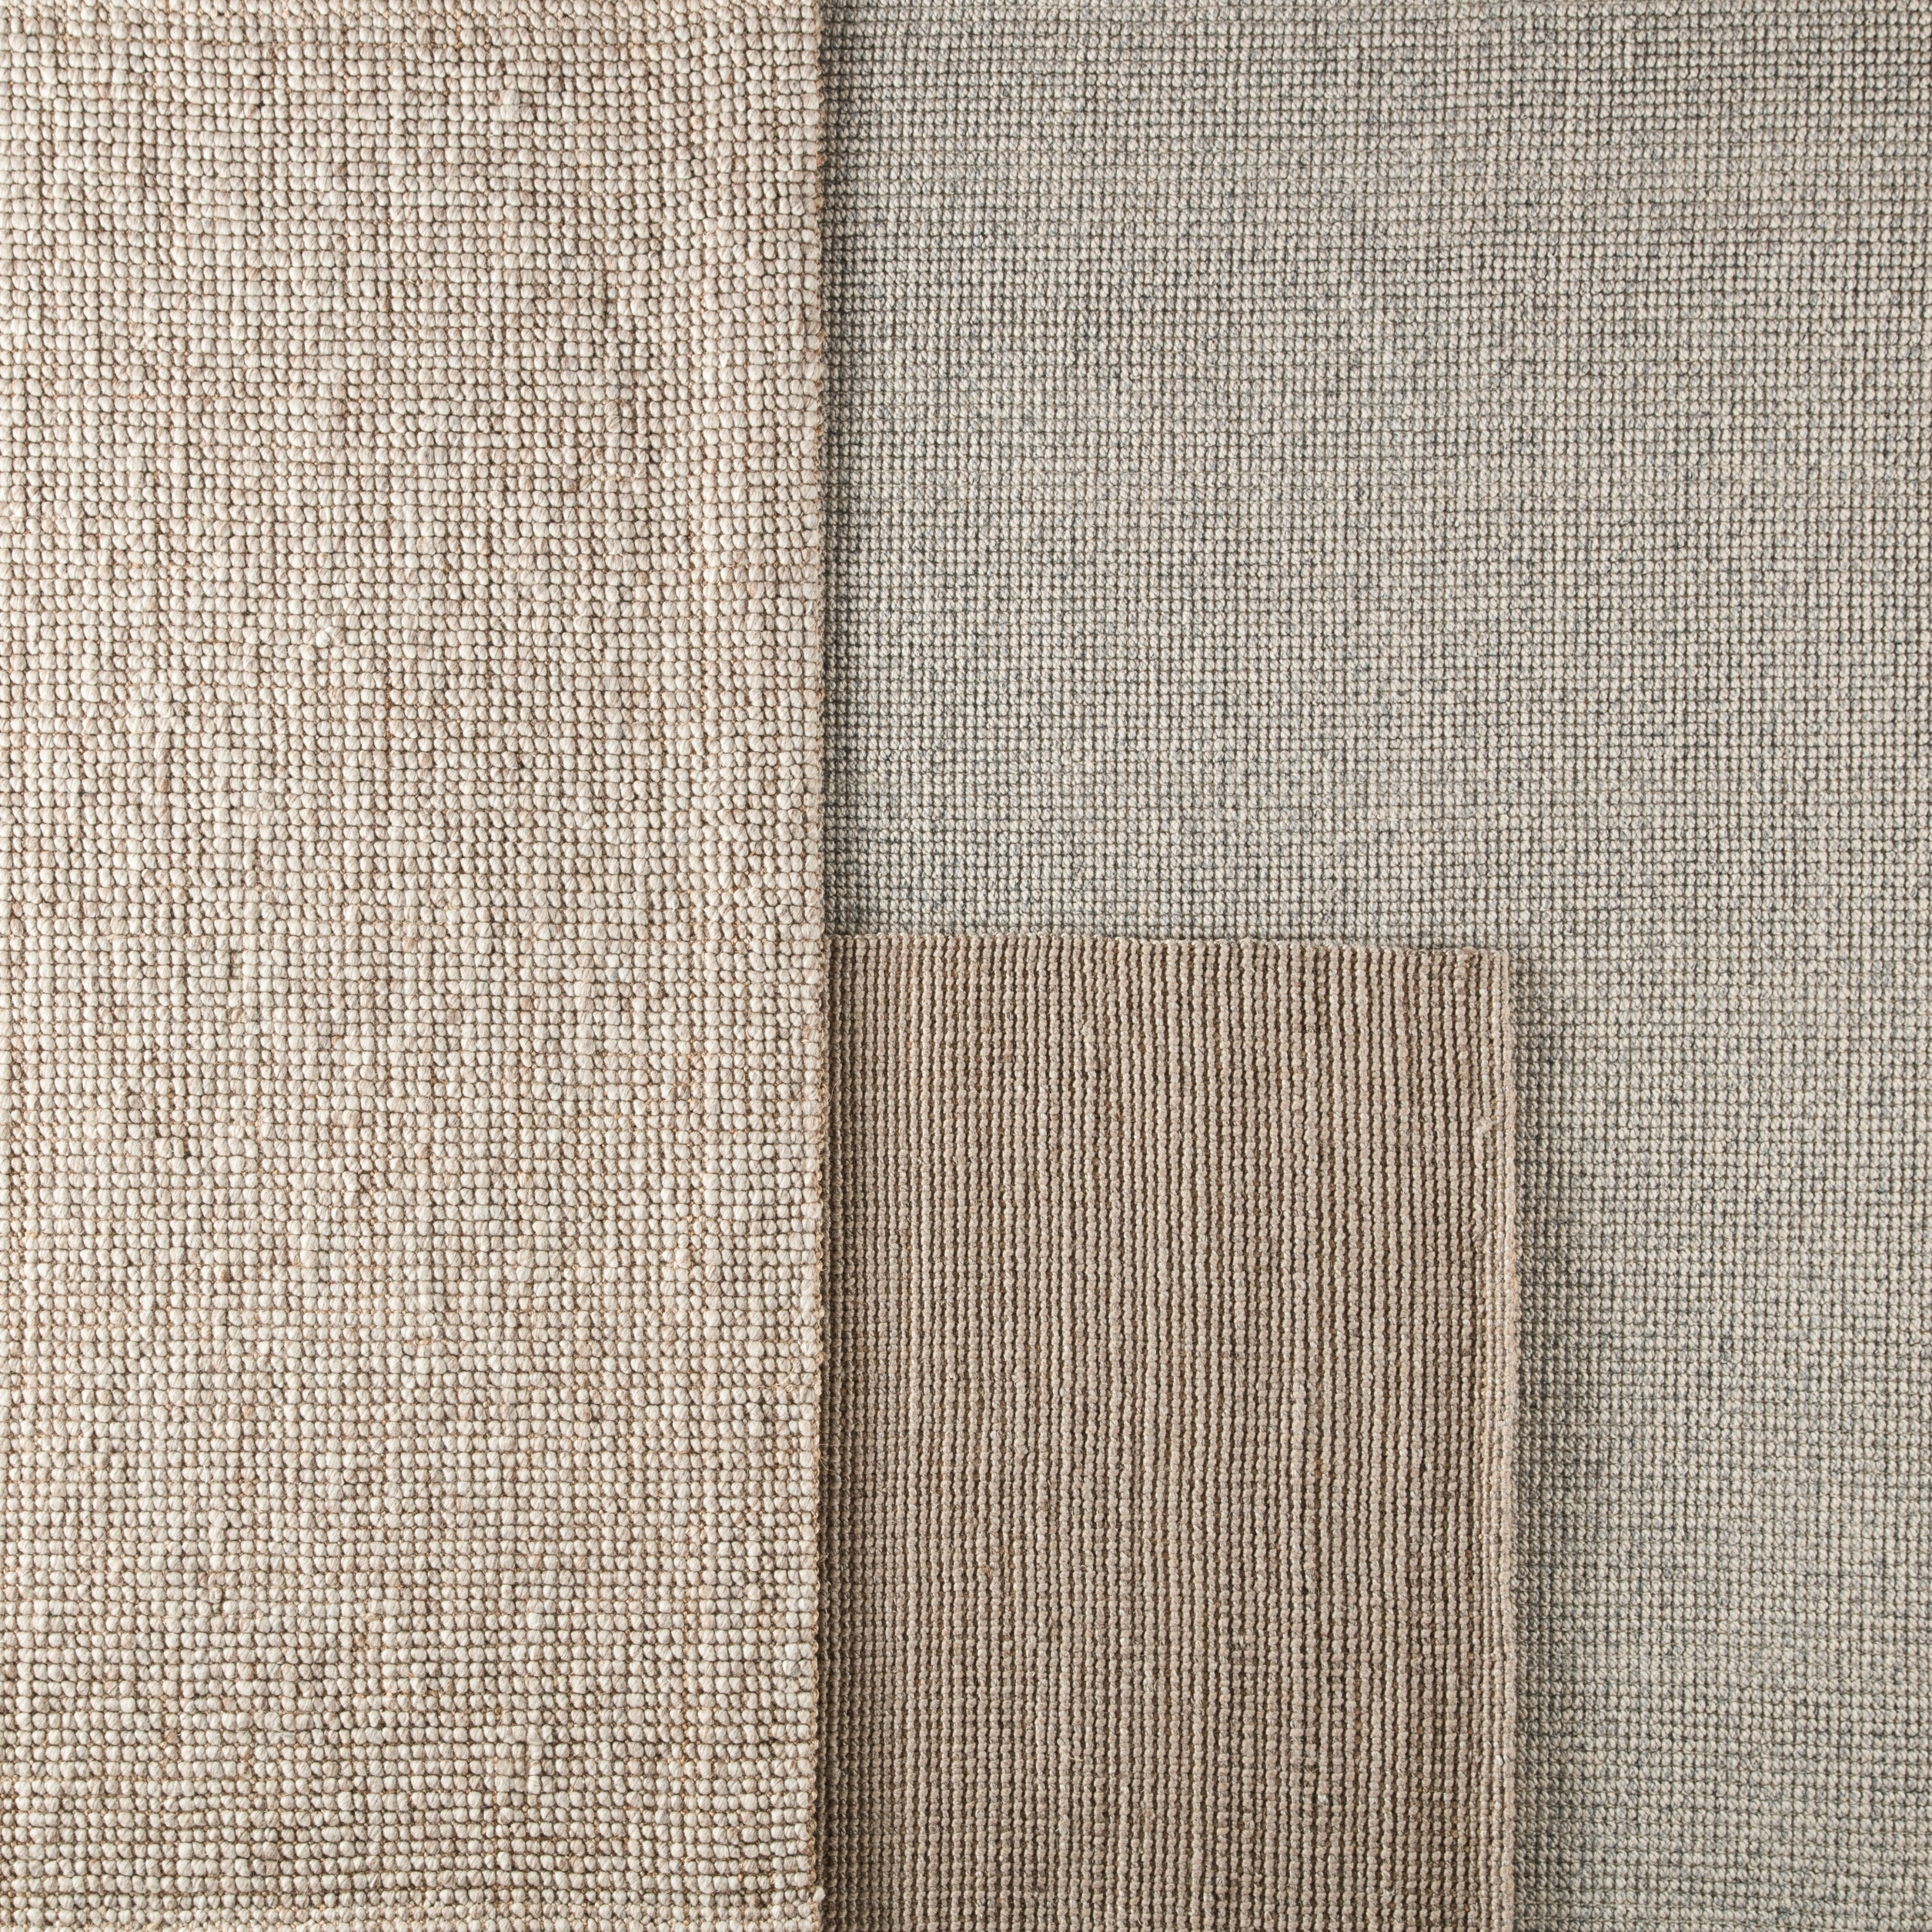 Beech Natural Solid Tan/ Taupe Area Rug (5'X8') - Image 5